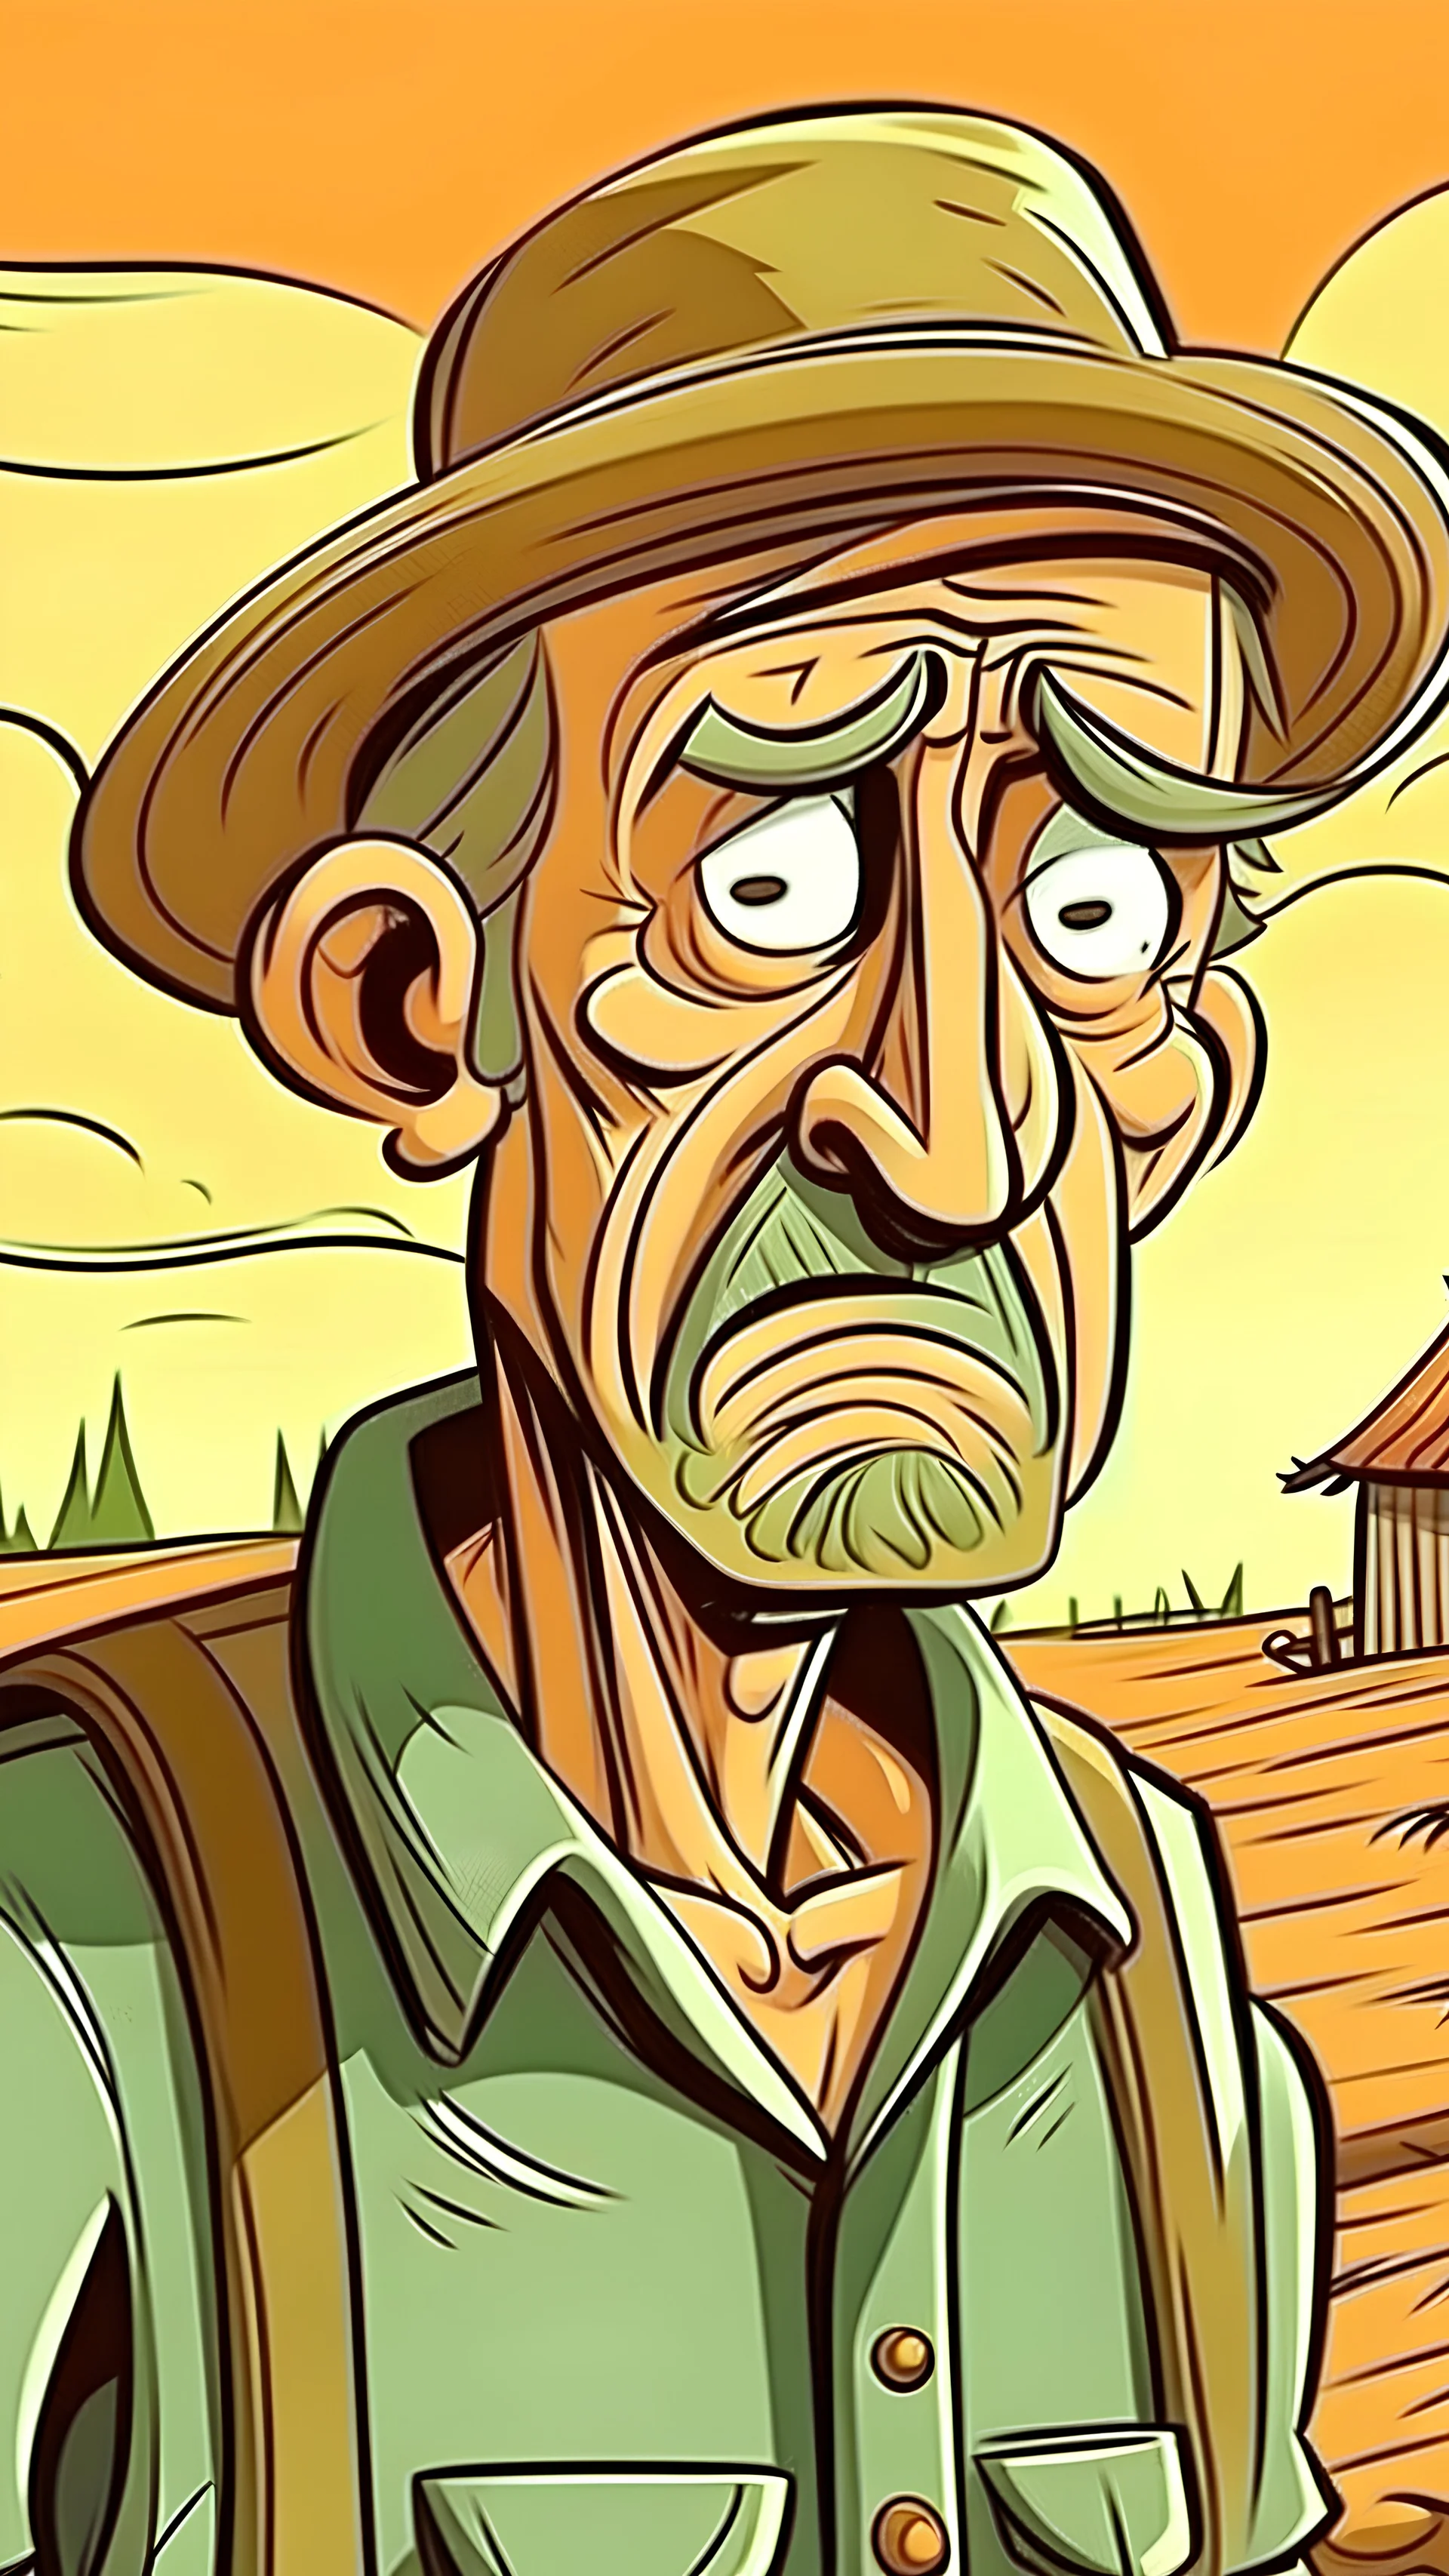 The farmer is very upset and knows that he is going to die in village cartoon image